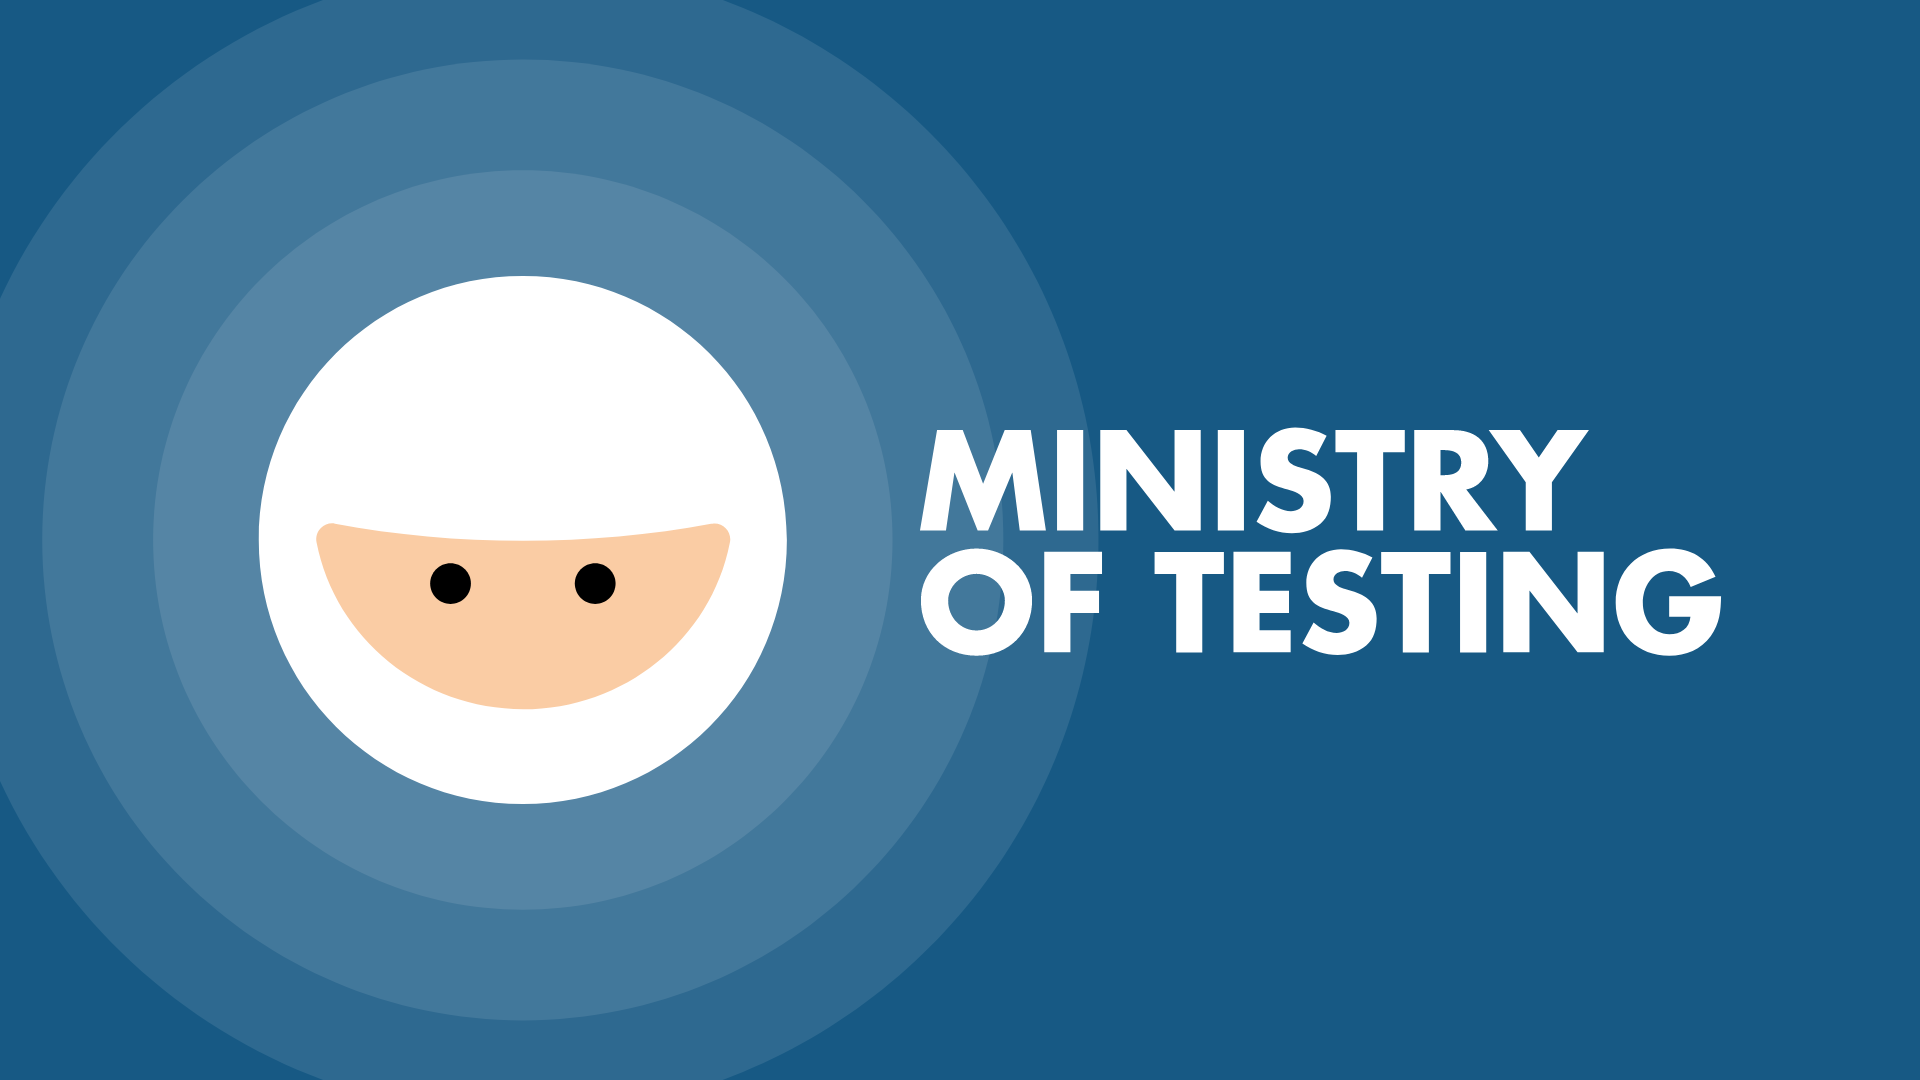 30 Days of Performance Testing, Are You In?